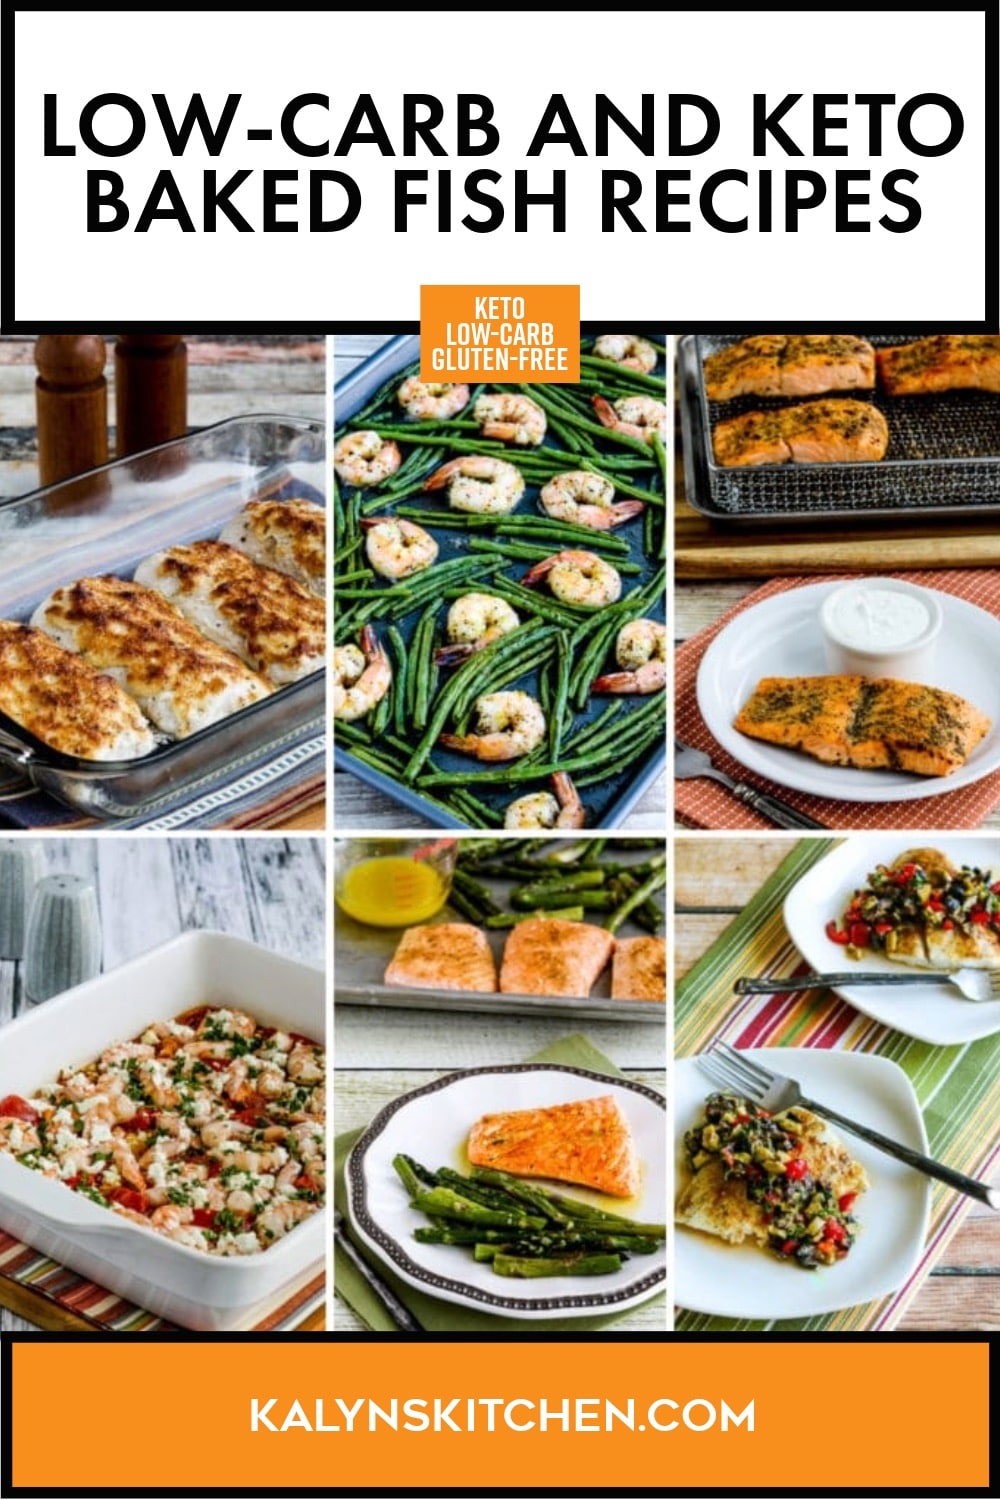 Pinterest image of Low-Carb and Keto Baked Fish Recipes